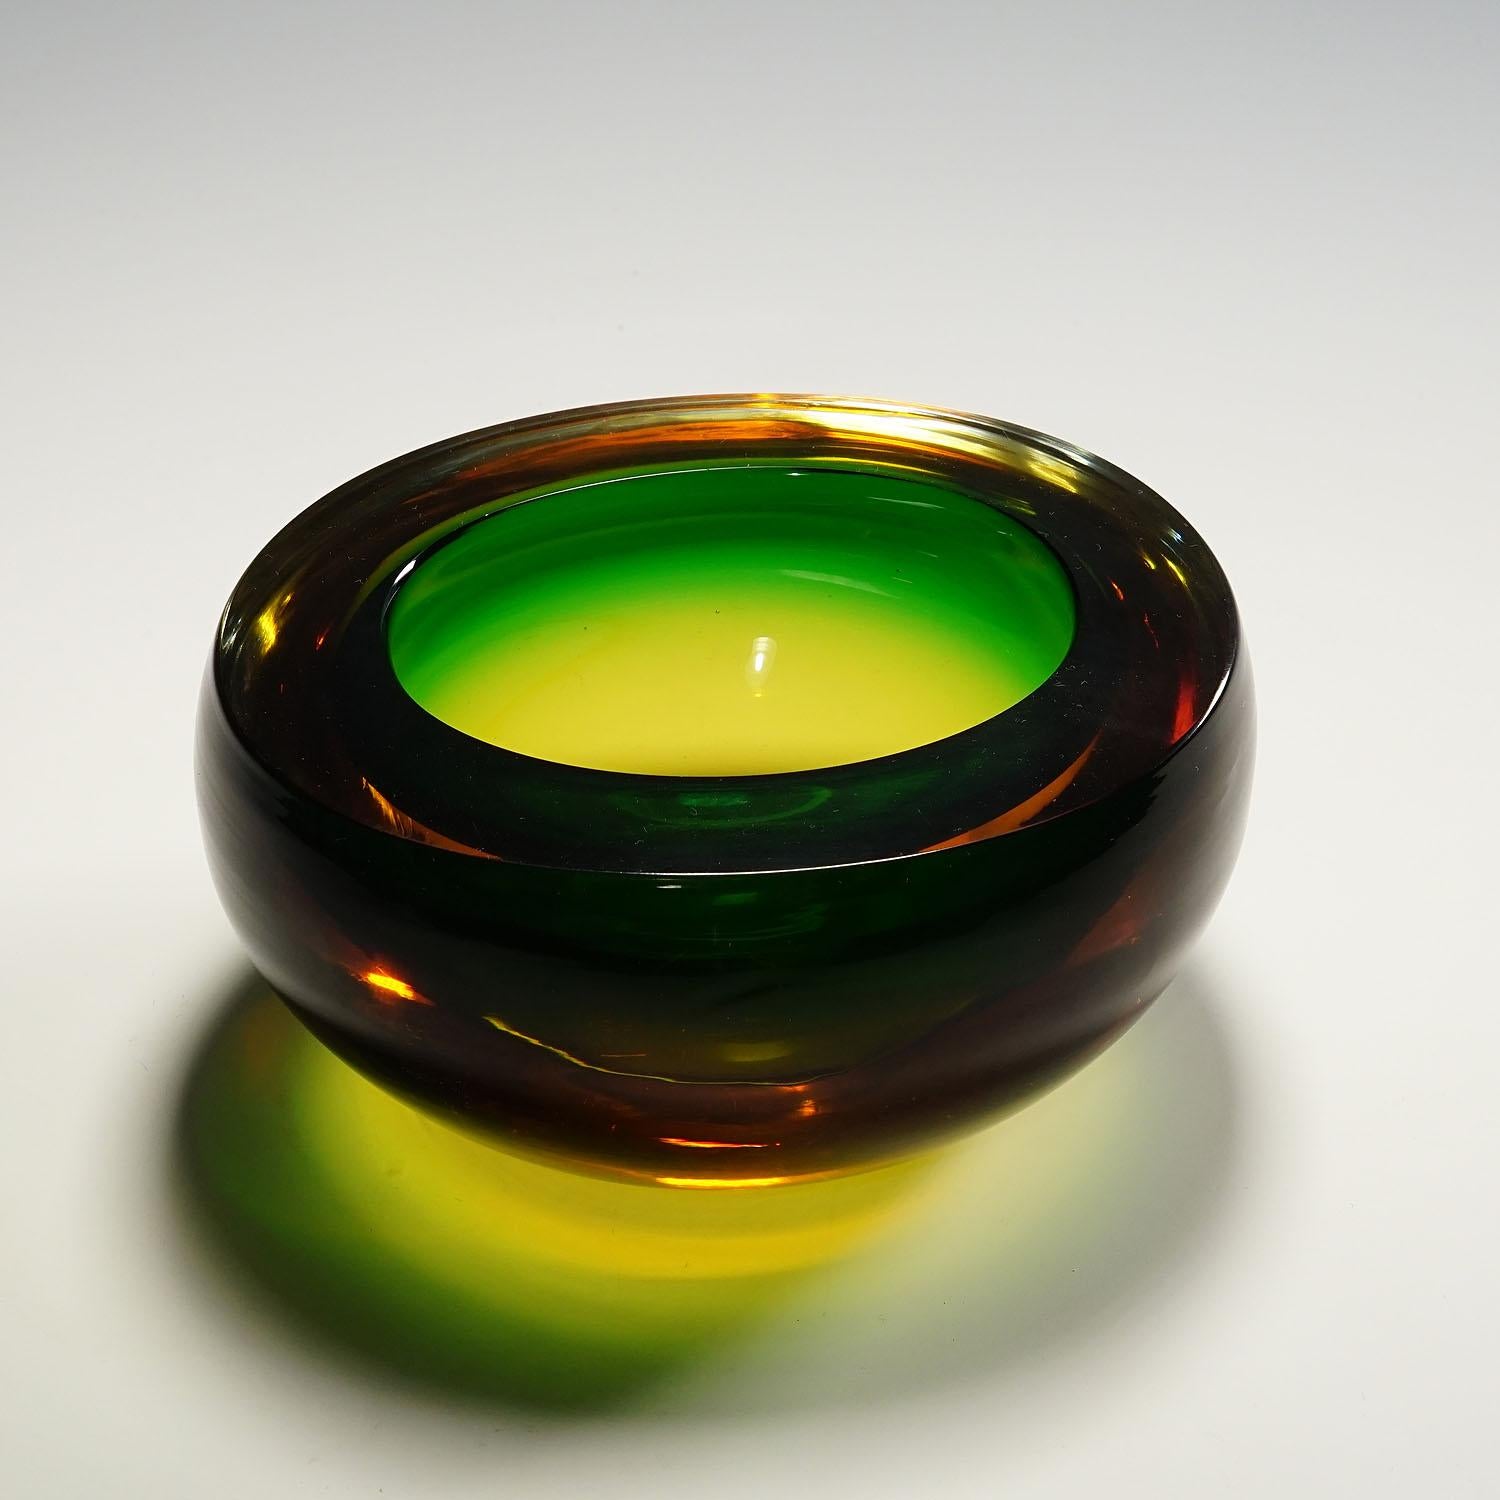 Mid-Century Modern Midcentury Modern Murano Green and Amber Sommerso Art Glass Bowl 1960s For Sale